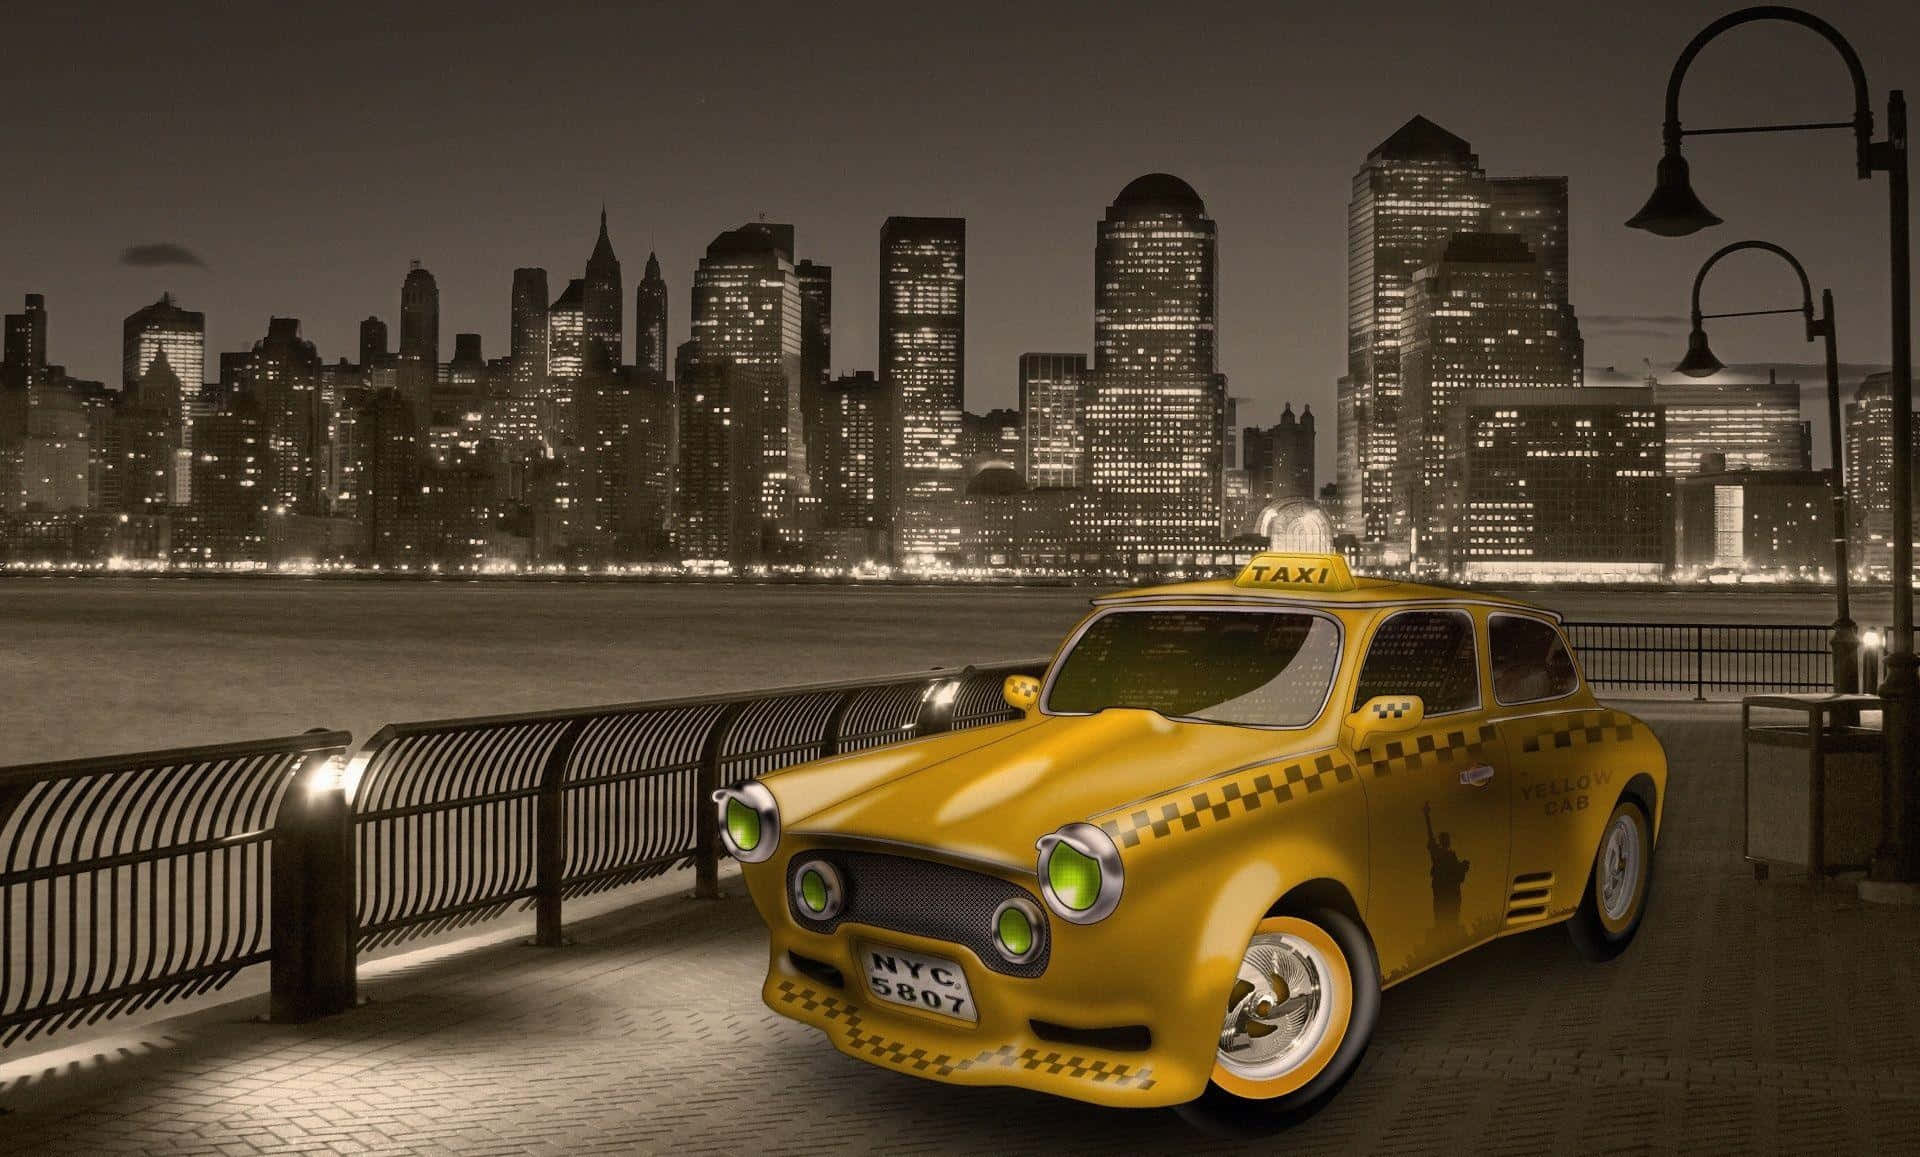 An empty yellow taxi stops at the curb, waiting for its next passenger.